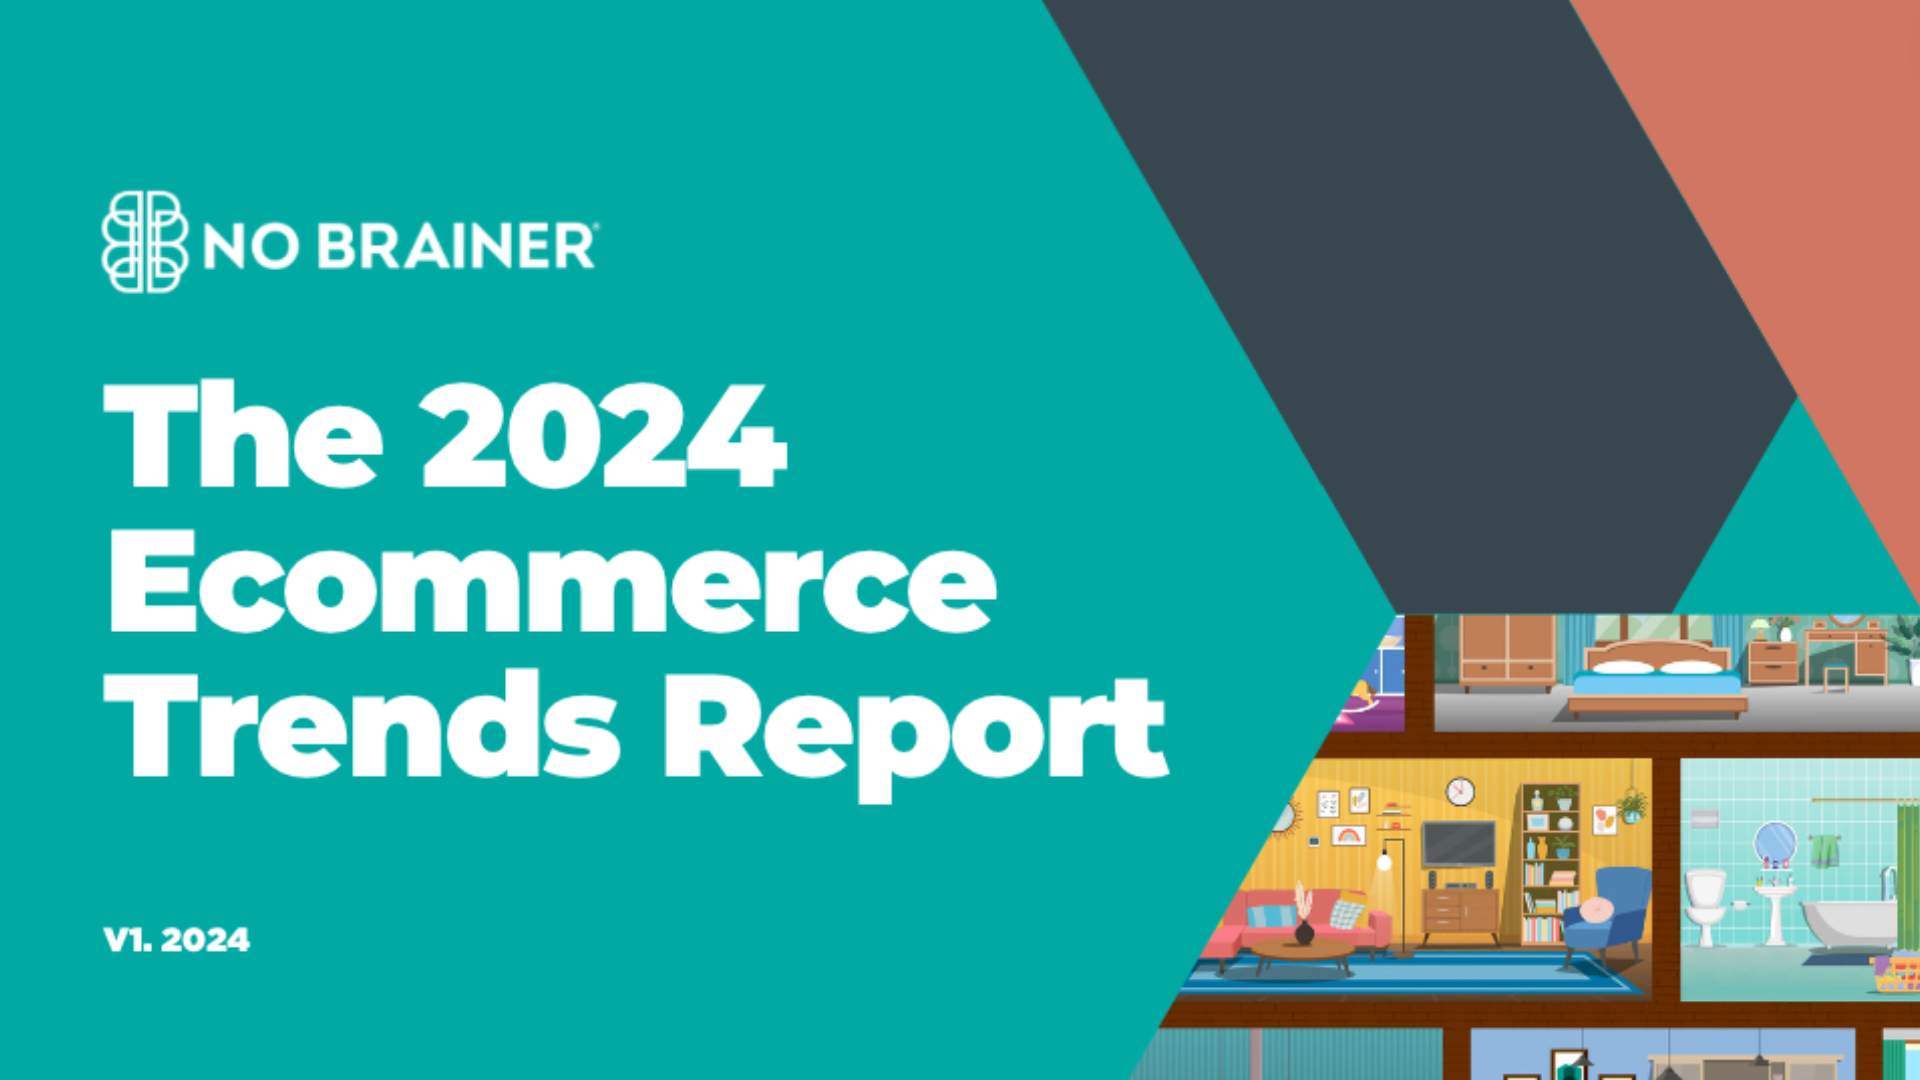 The 2024 Ecommerce Trends Report